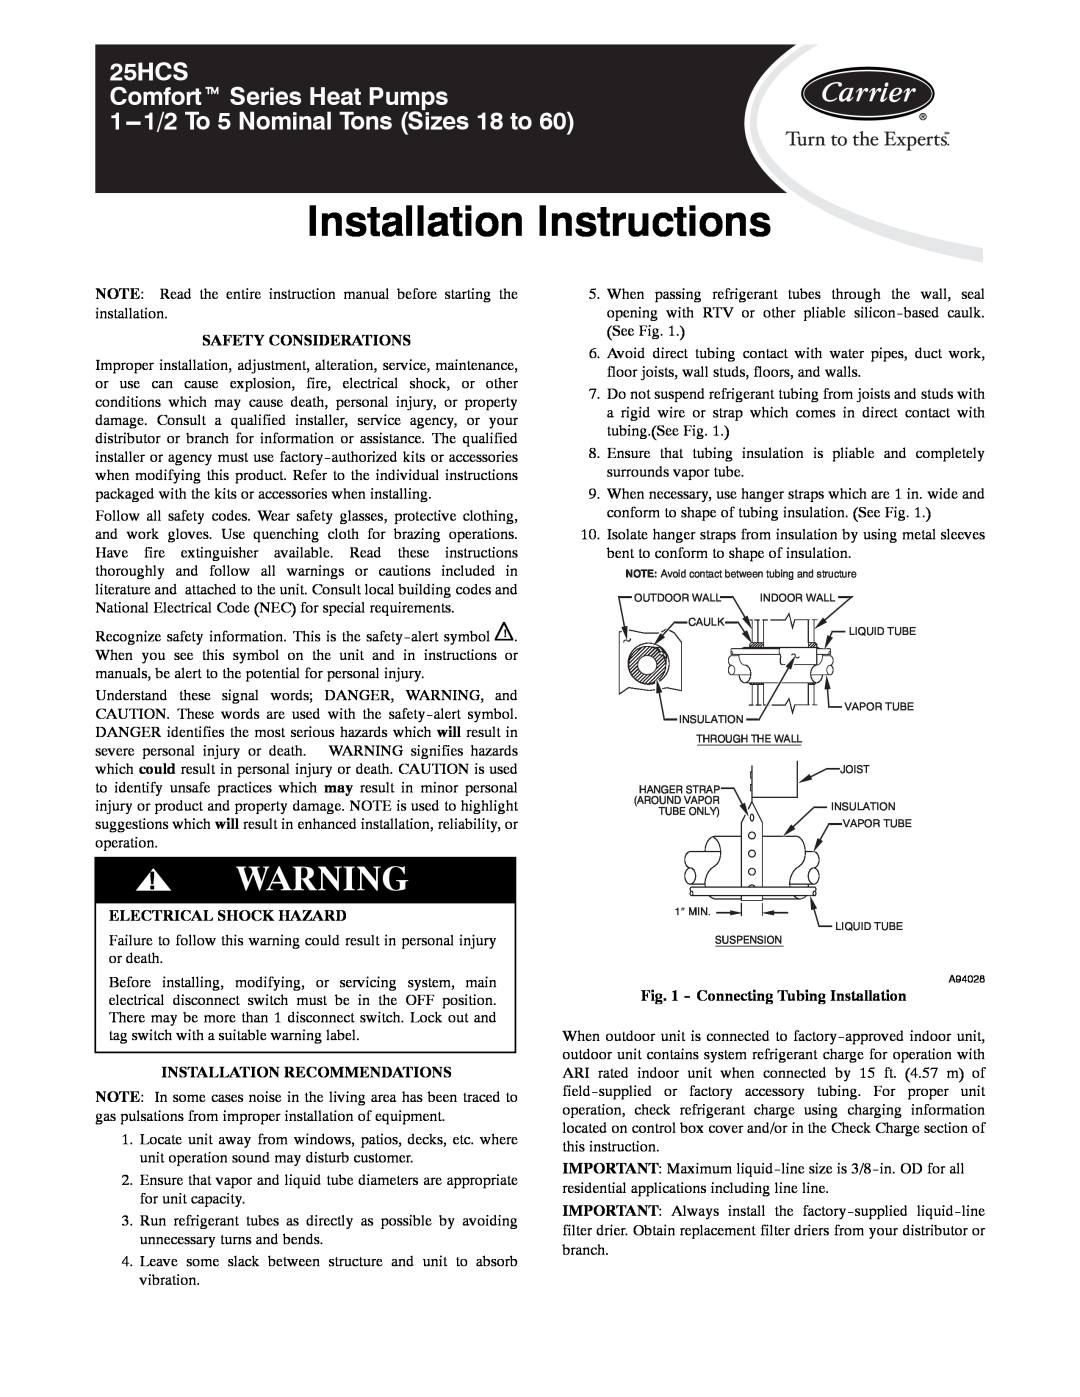 Carrier 25HCS installation instructions Safety Considerations, Electrical Shock Hazard, Installation Recommendations 